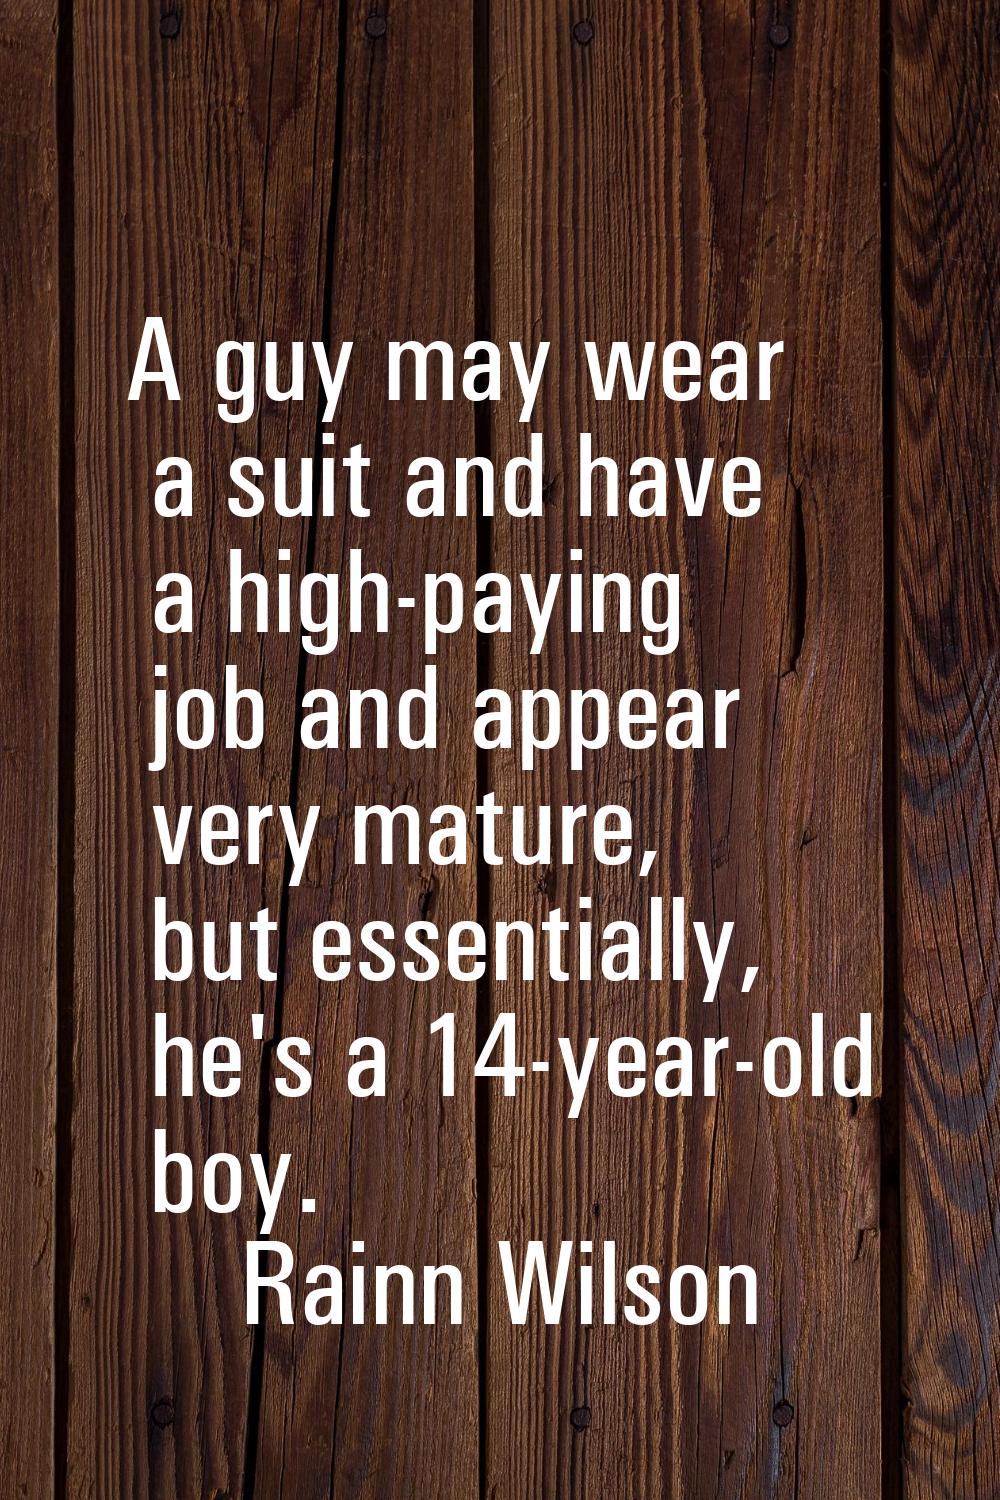 A guy may wear a suit and have a high-paying job and appear very mature, but essentially, he's a 14